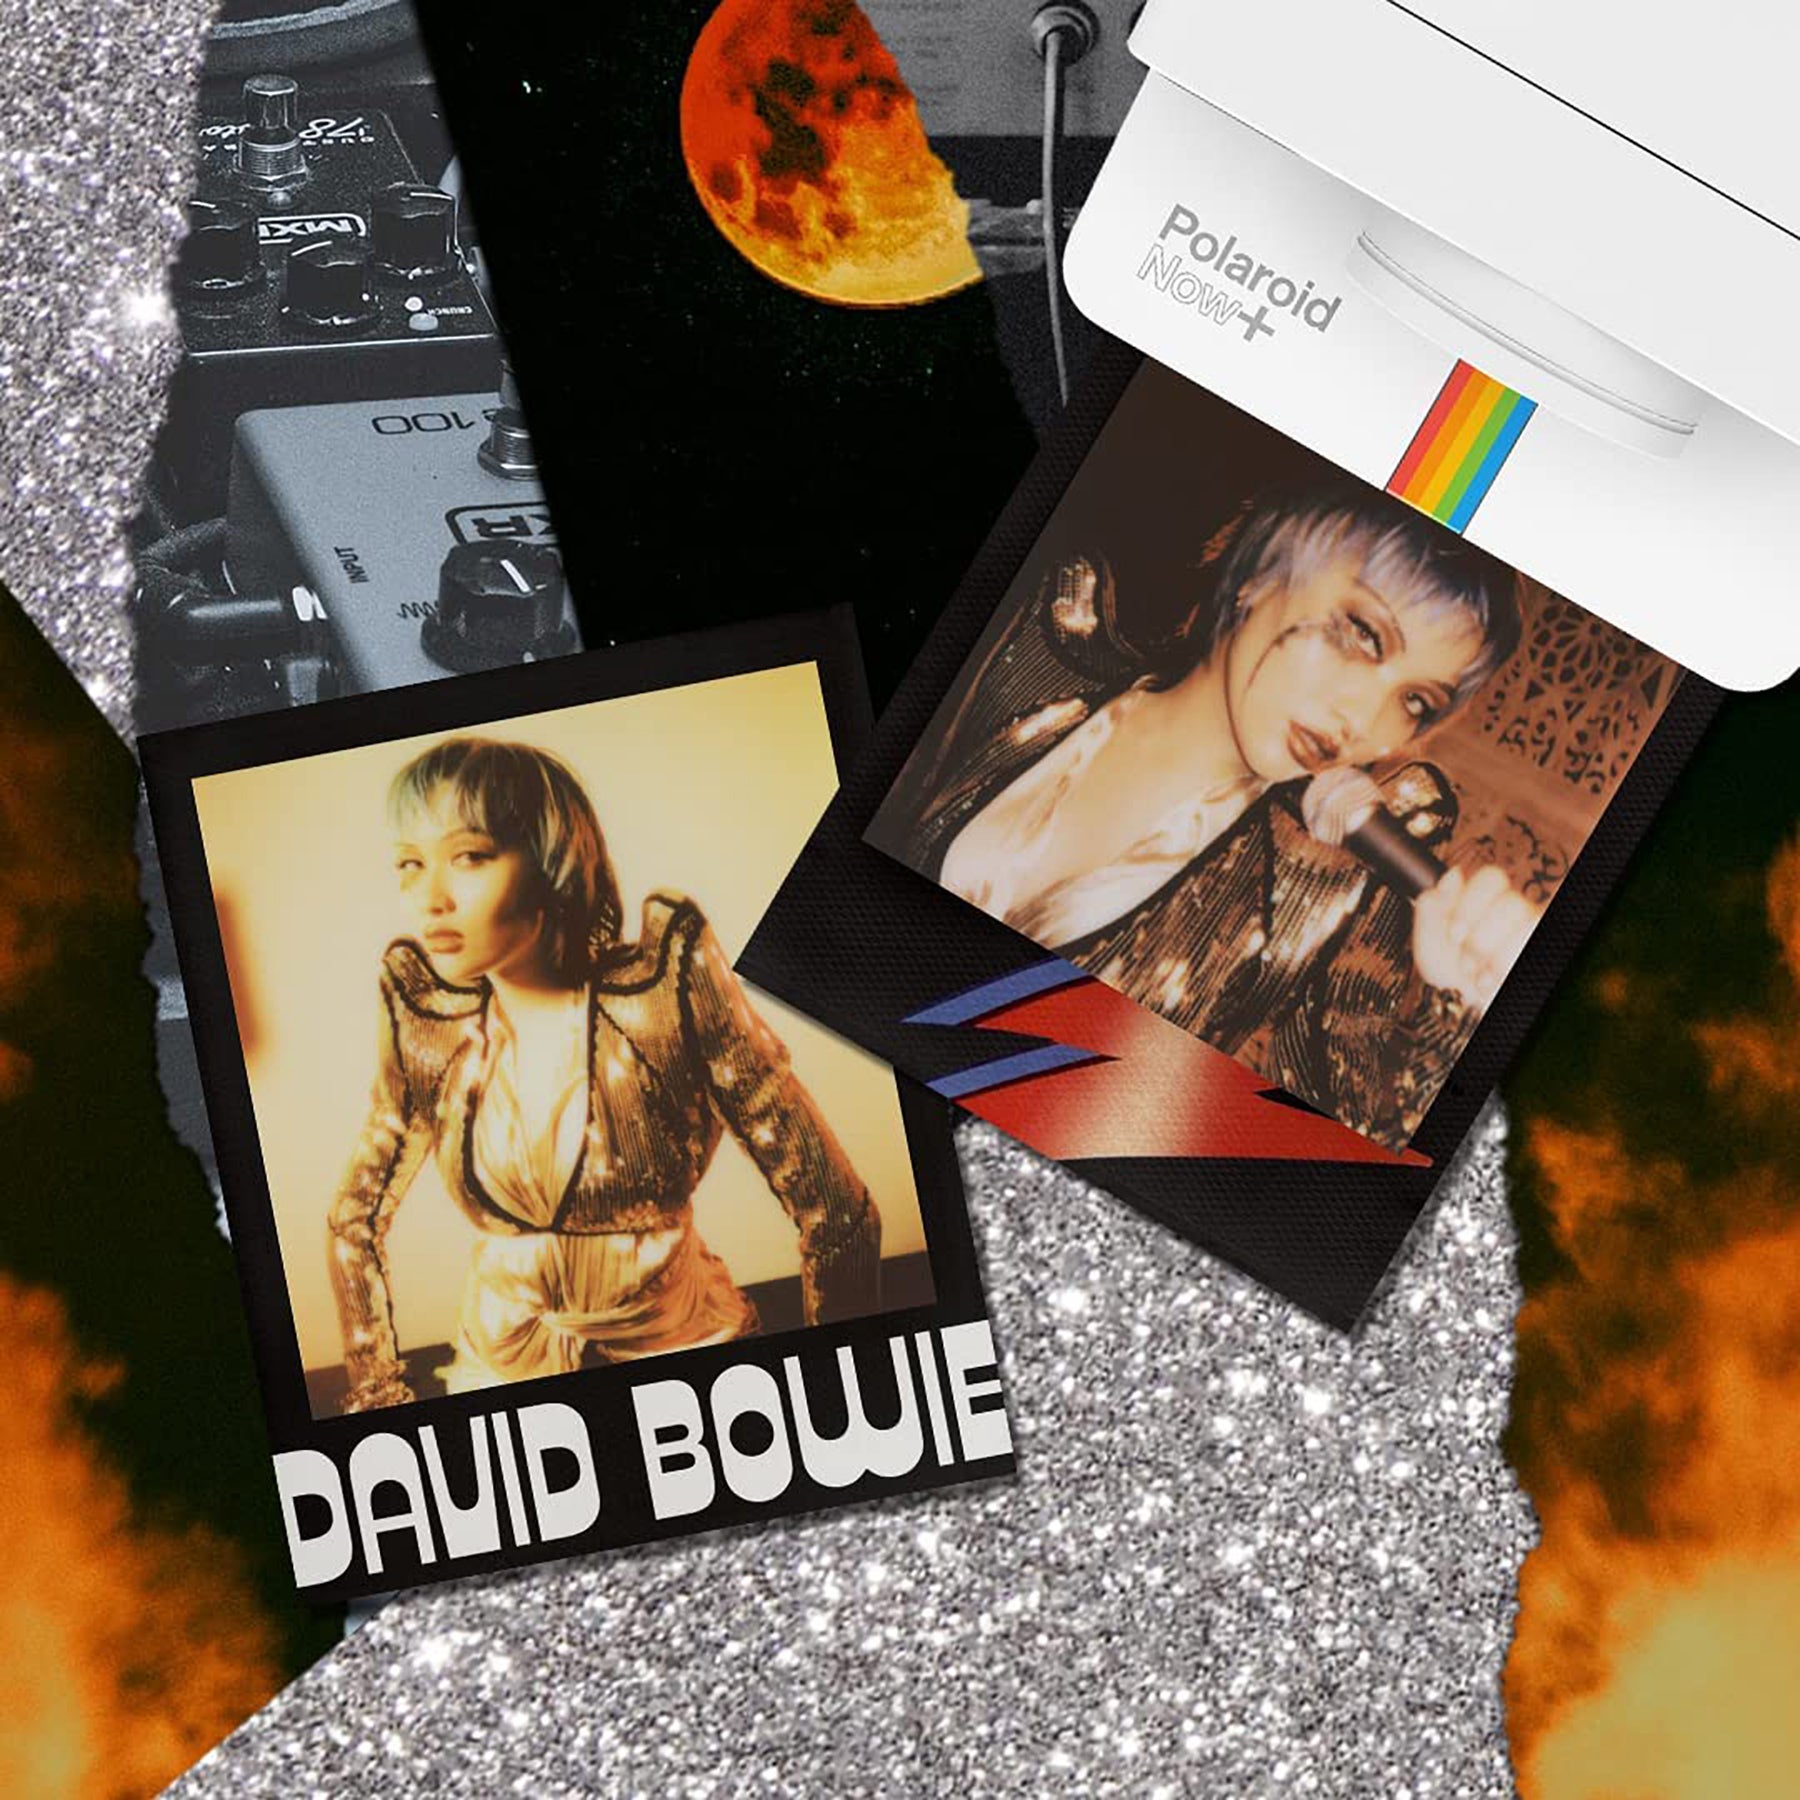 Polaroid Color I-Type Film - David Bowie Limited Edition